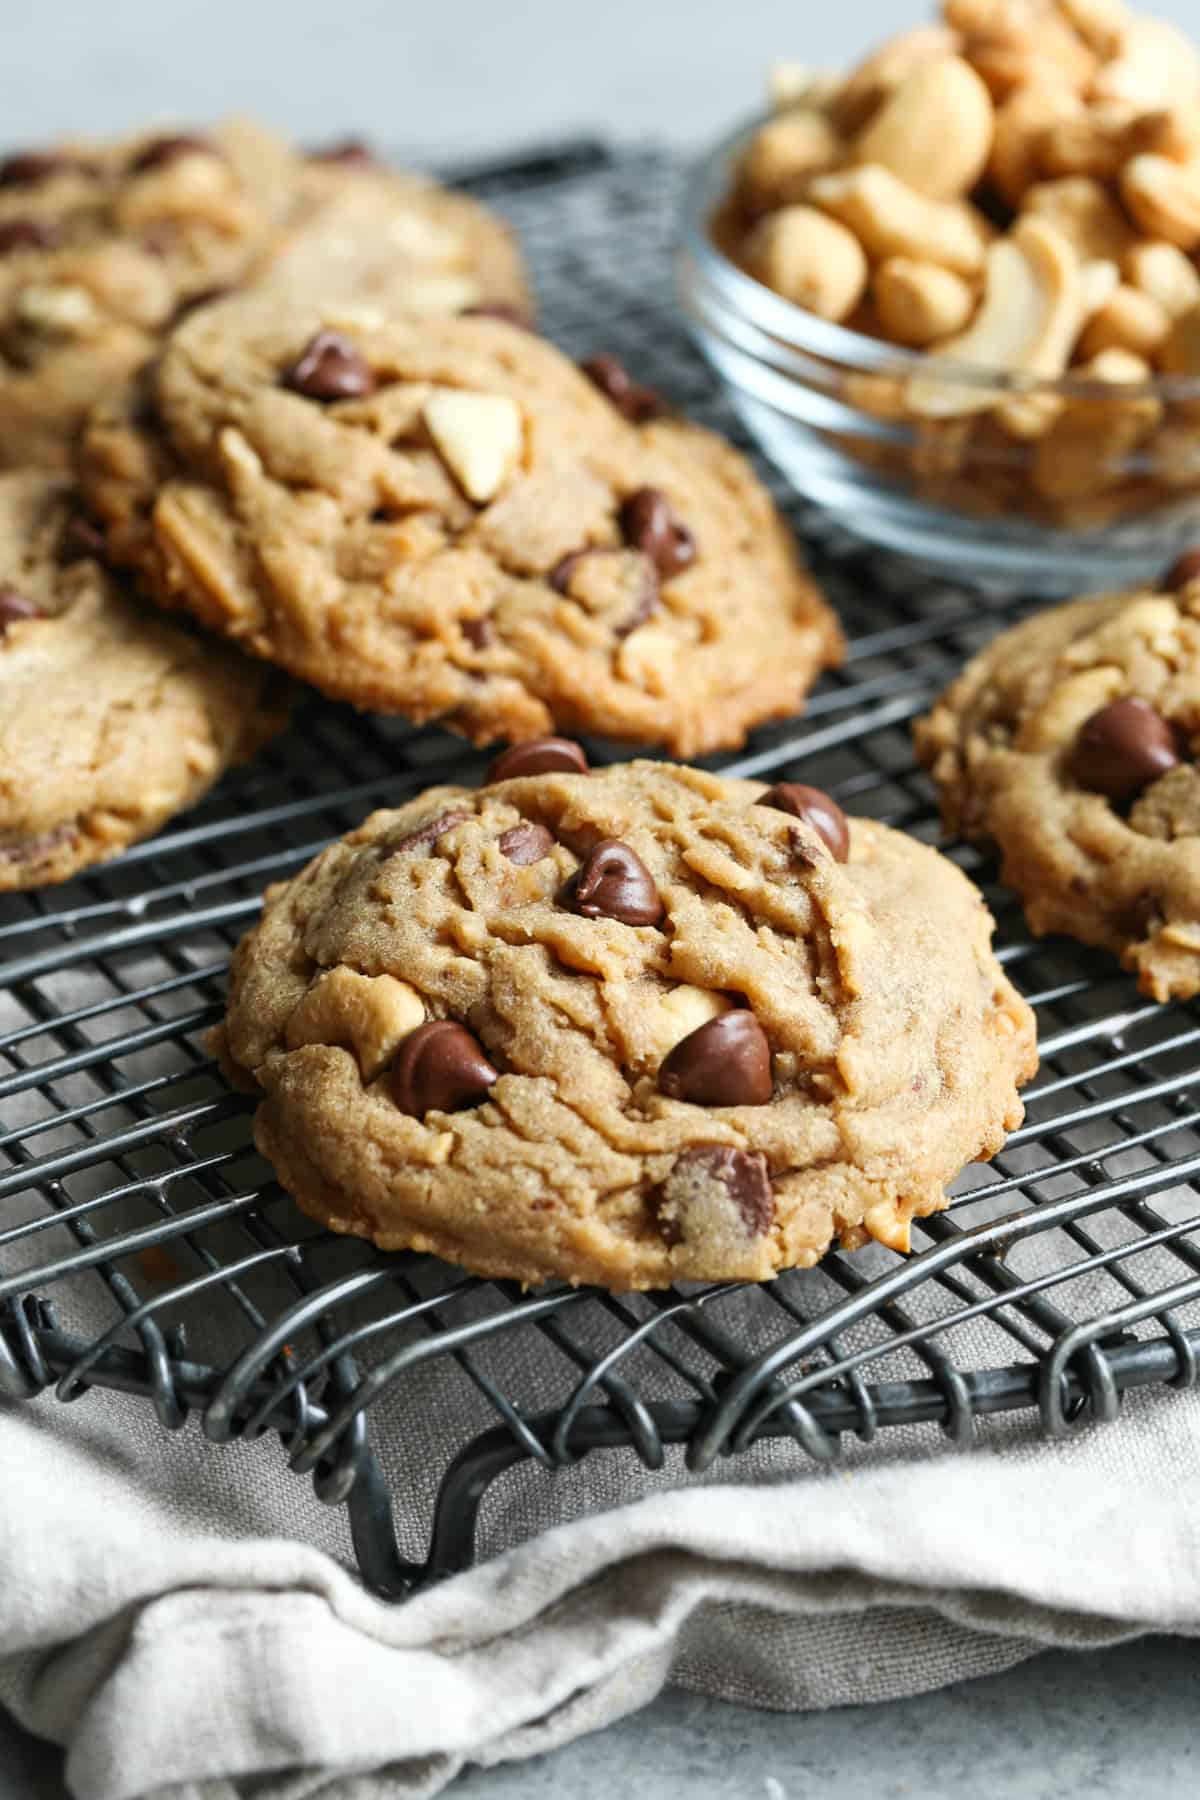 Cookies with cashews, toffee, and chocolate chips made with brown butter on a wire rack